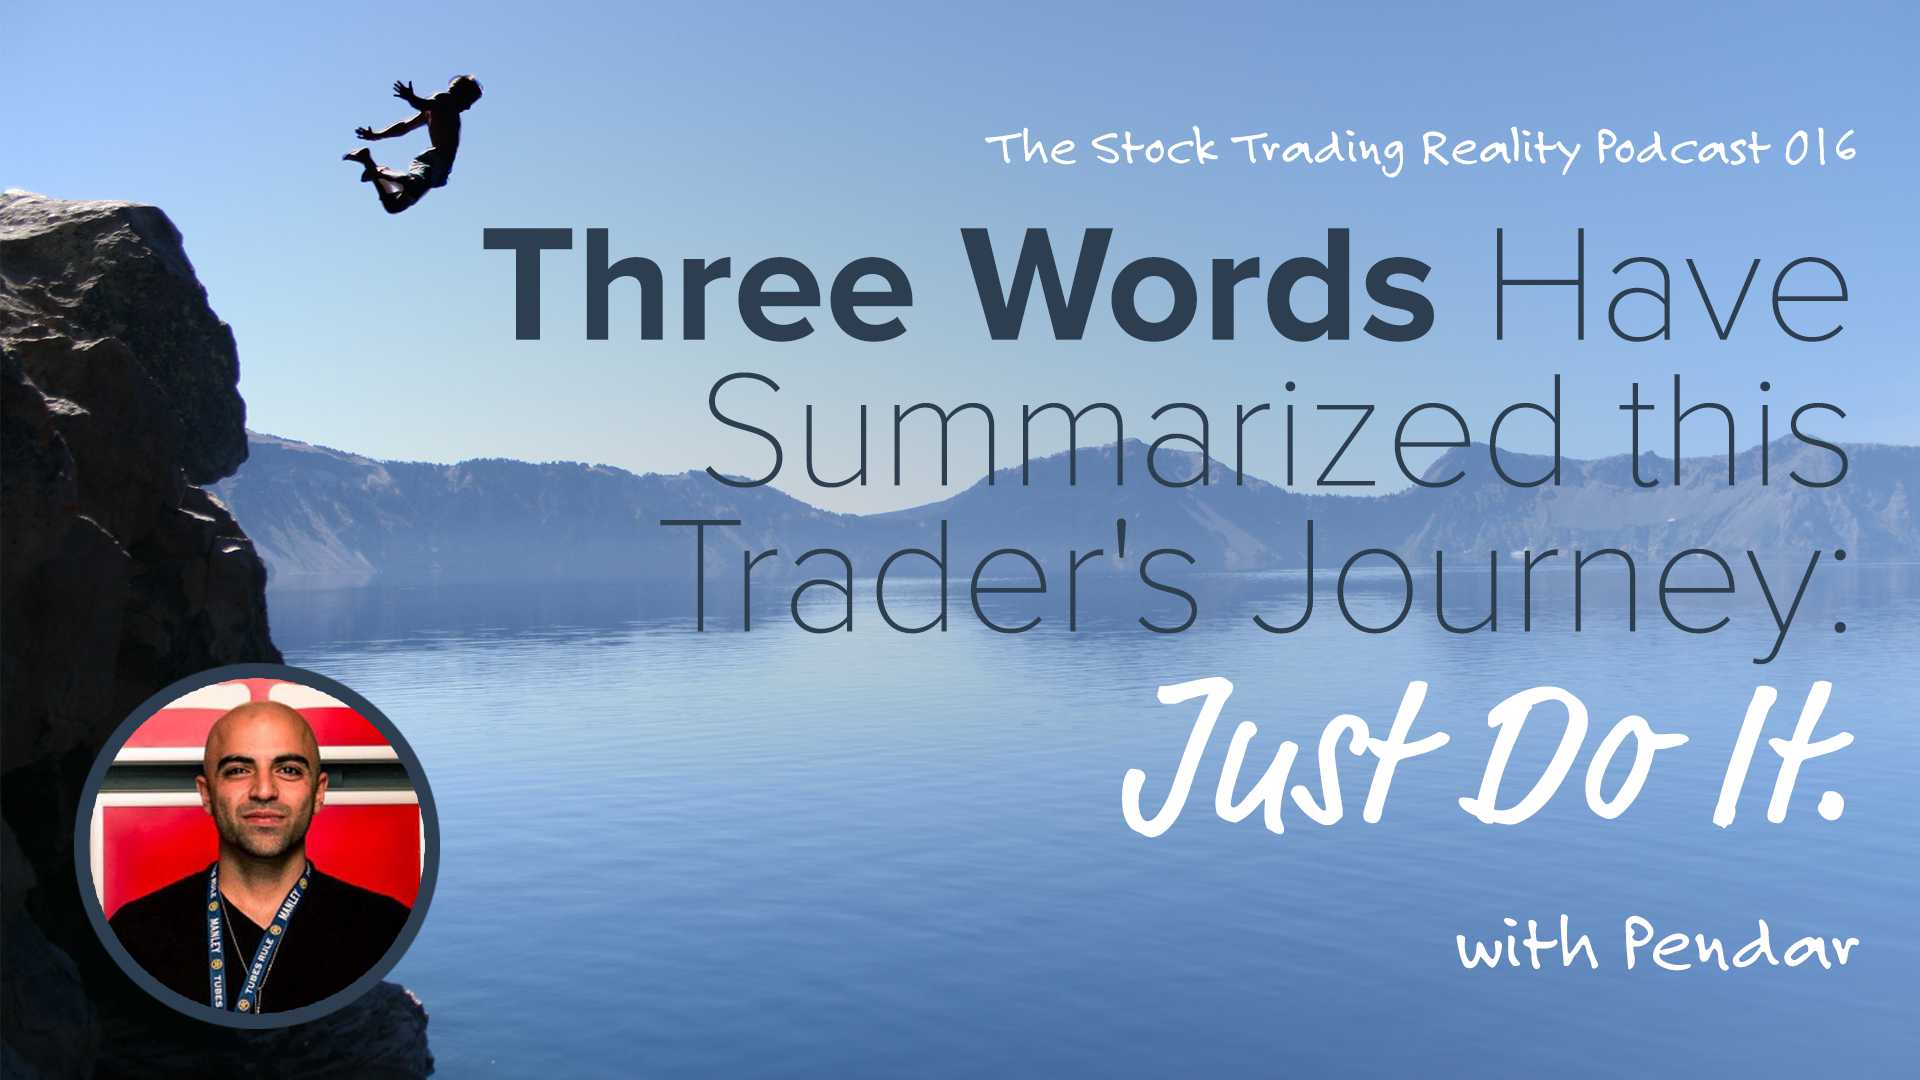 STR 016: Three Words Have Summarized this Trader's Journey: Just Do It.